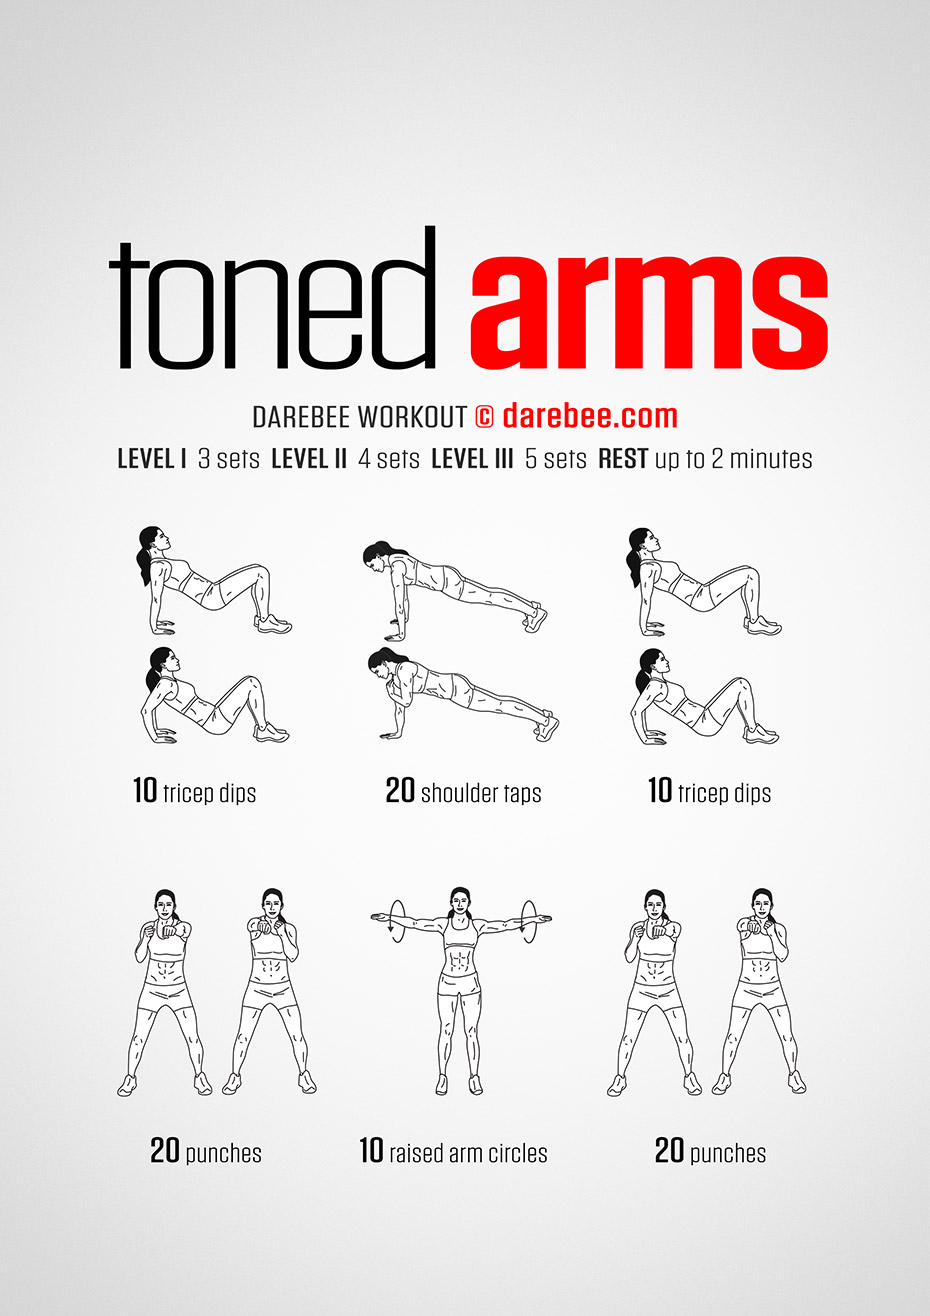 6 Day Arm Workouts For Teenage Guys At Home for Build Muscle